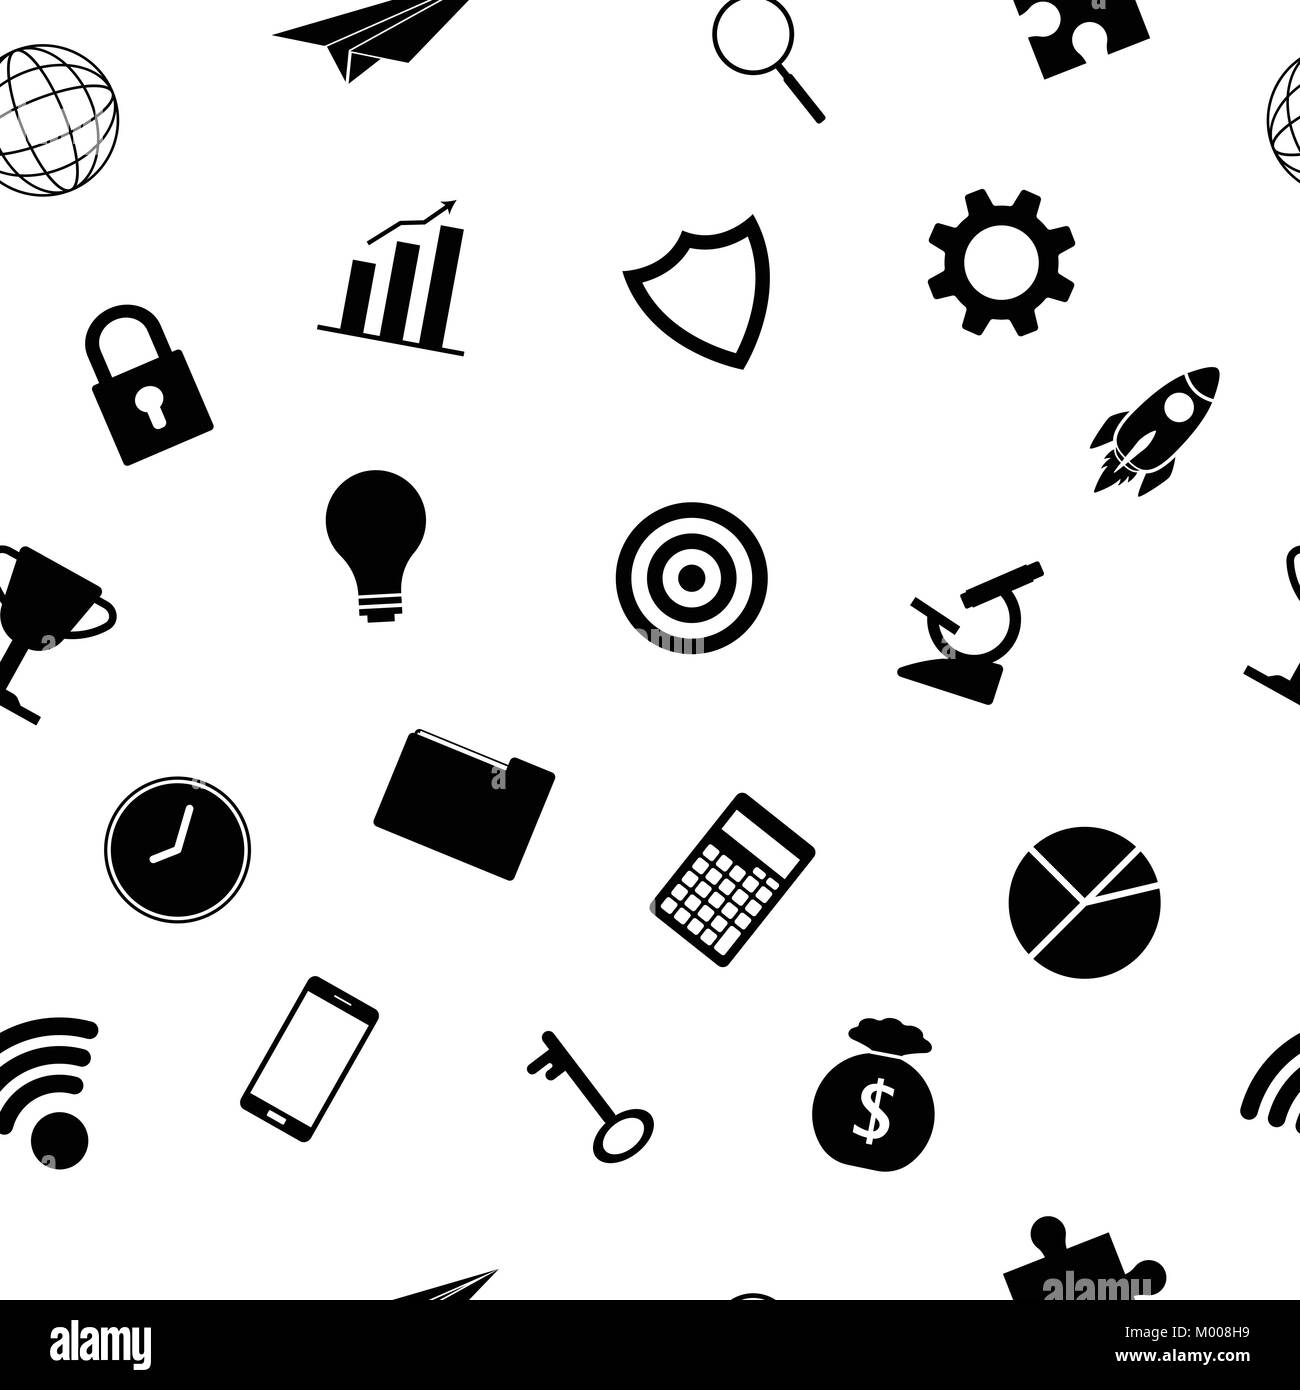 Vector Illustration Business Icons Silhouette Seamless Pattern Background Designed as Multiple Objects Involved In Work, Startup, Finance. Stock Vector